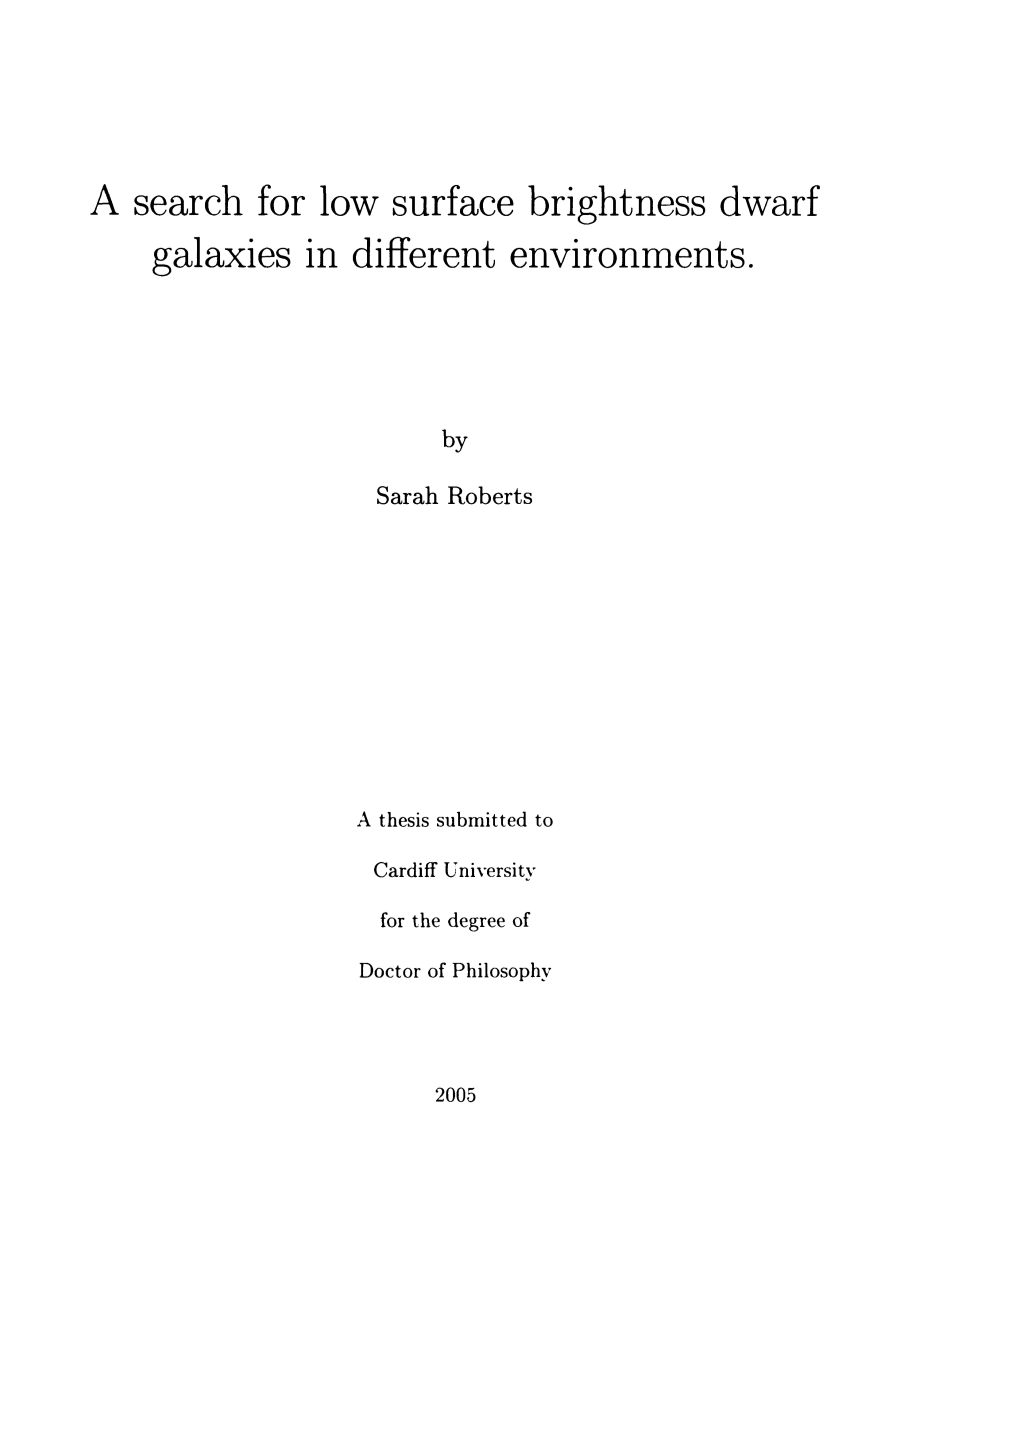 A Search for Low Surface Brightness Dwarf Galaxies in Different Environments